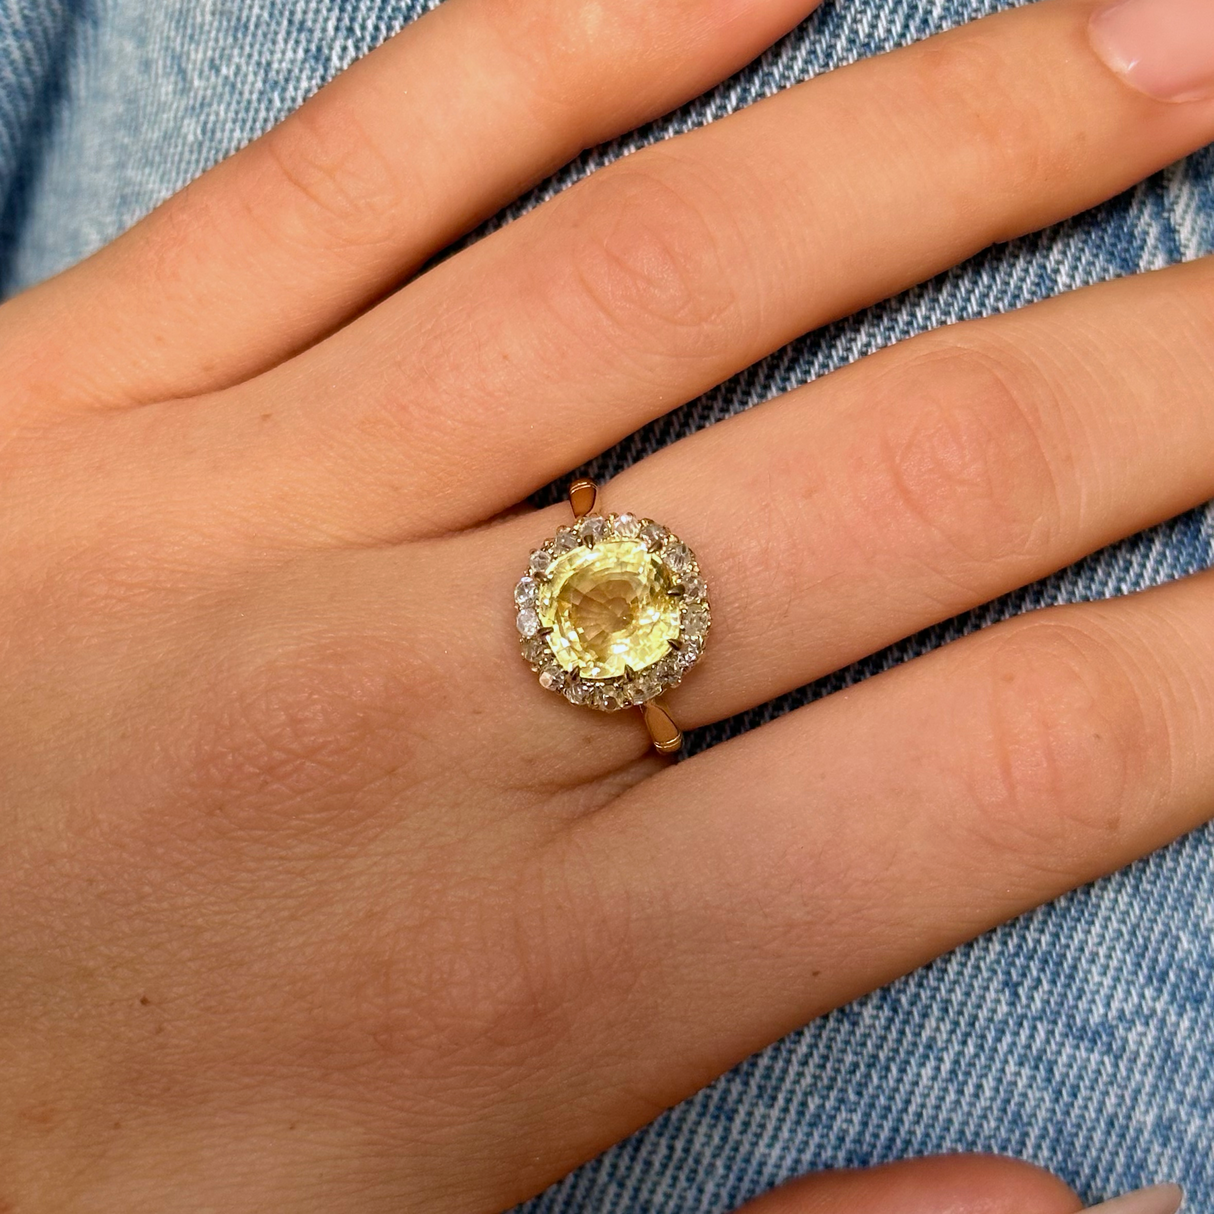 Vintage, Cushion-cut Yellow Sapphire Diamond Cluster Engagement Ring, worn on hand placed on denim jeans, front view. 